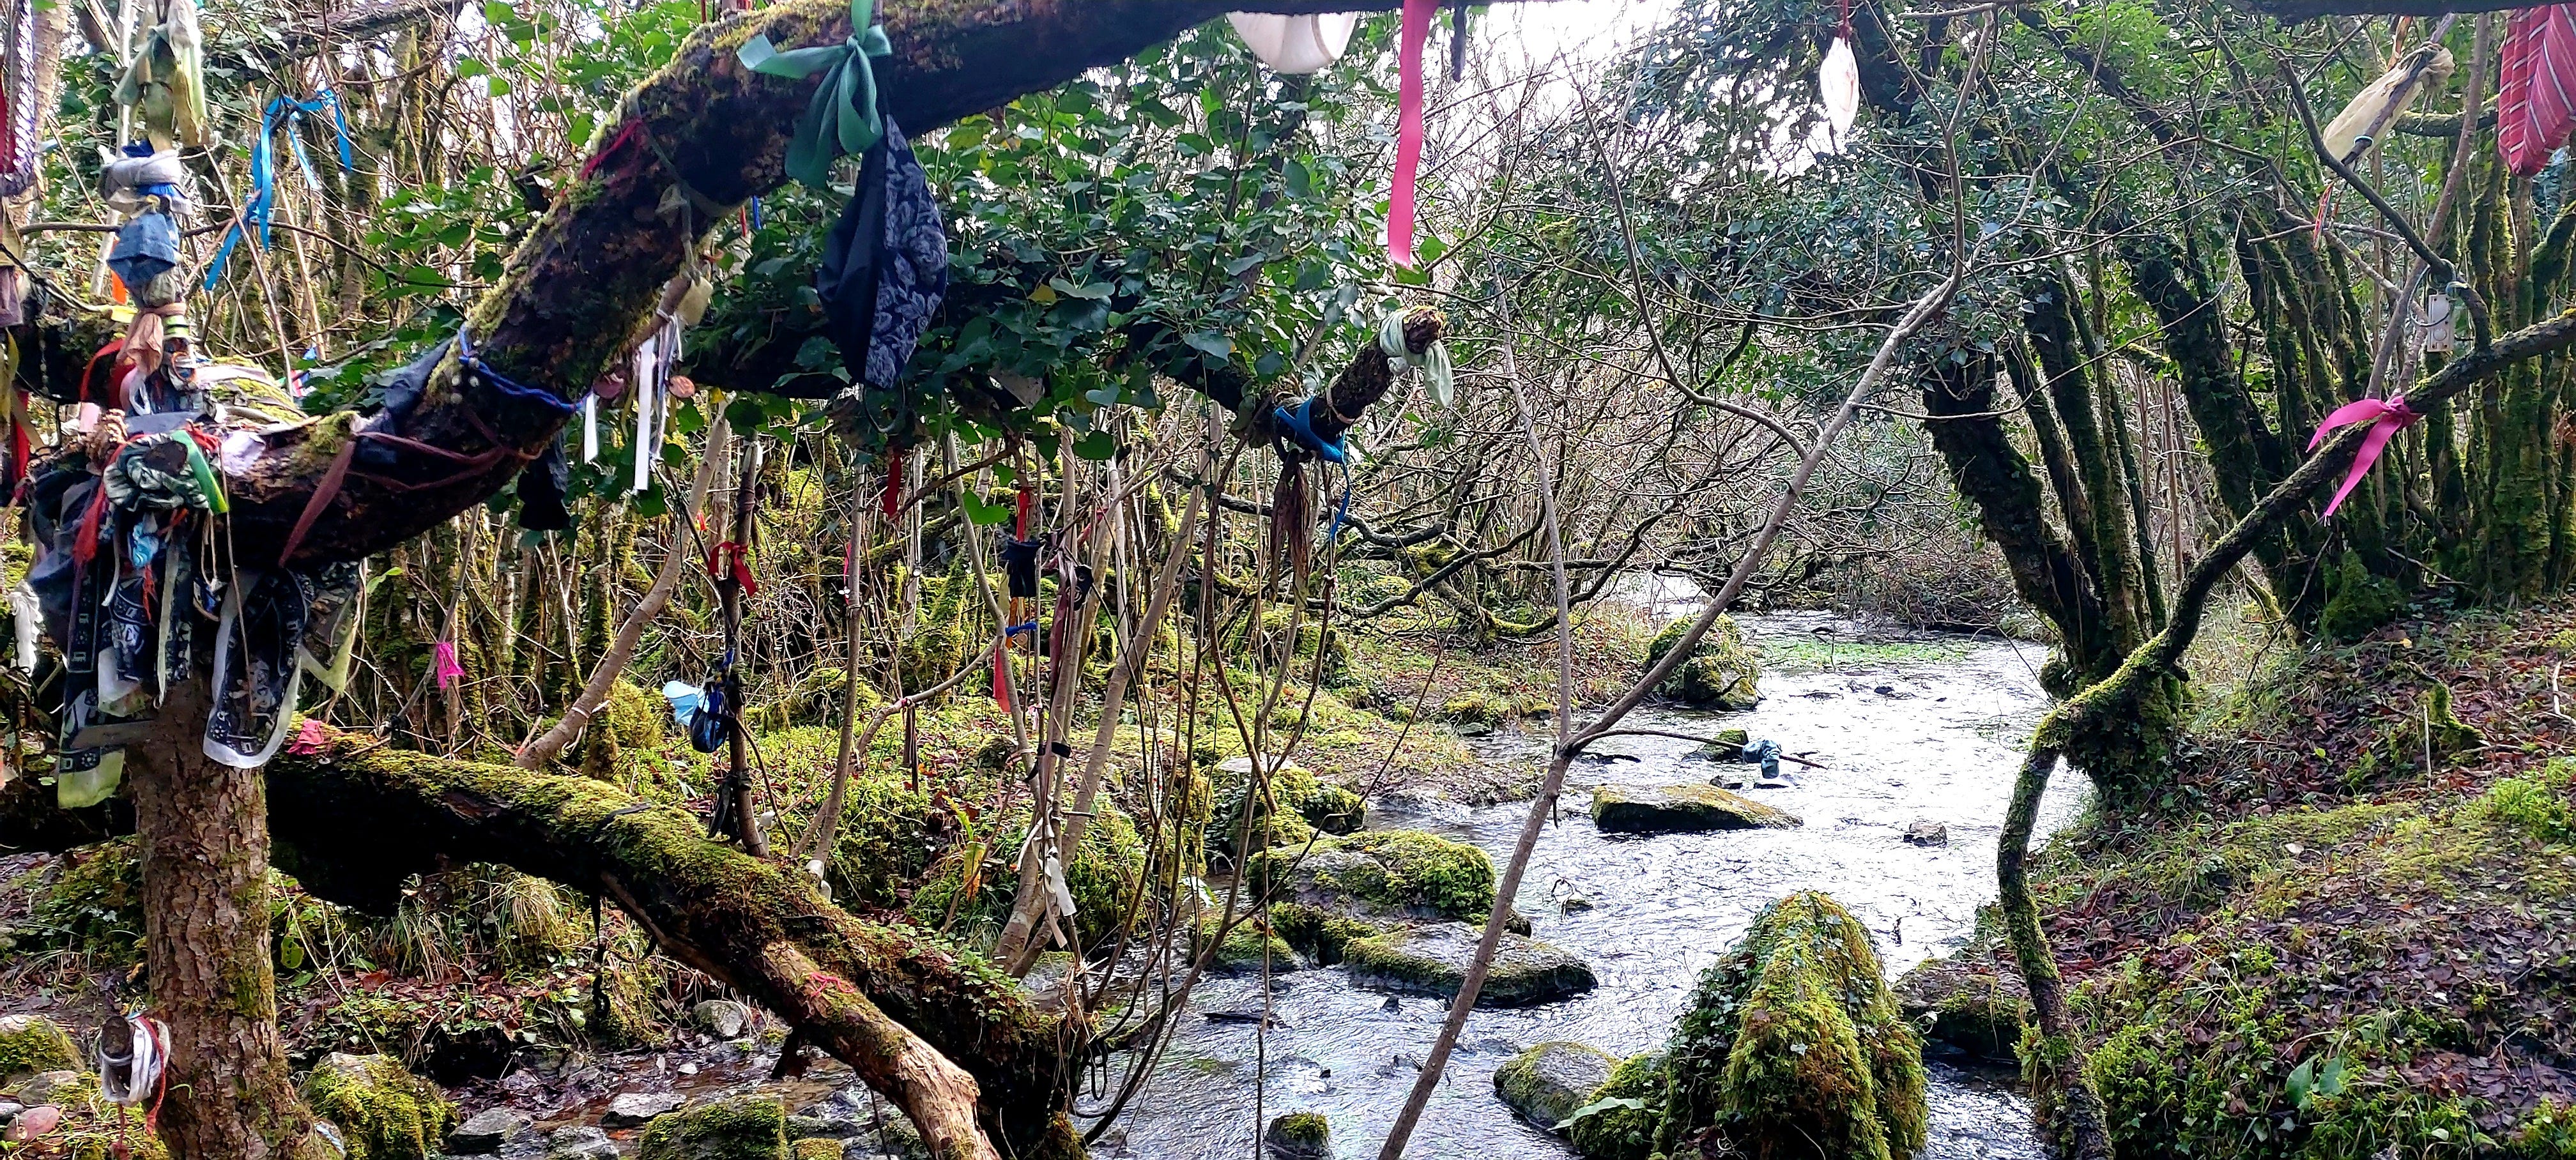 A river in County Clare, edged with moss-covered boulders, and surrounded by wild forest. To the left of the image, a fairy tree is festooned with rags and gifts, and it sends out one gnarly decorated branch across the river, and across the image.